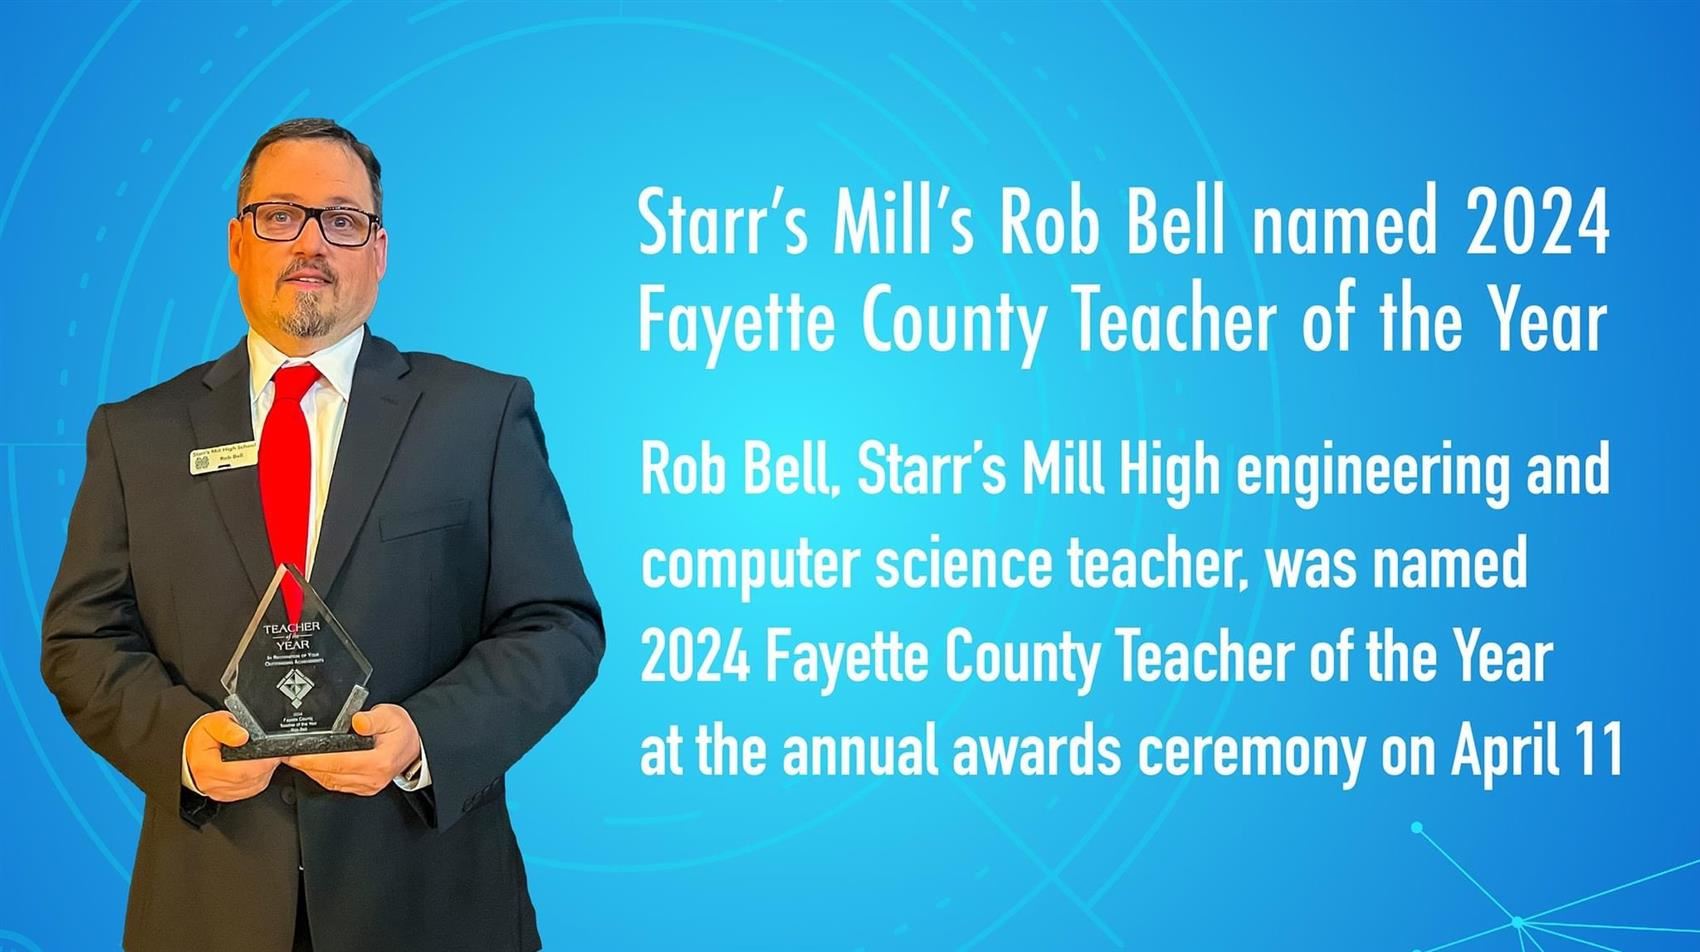  Fayette County Teacher of the year